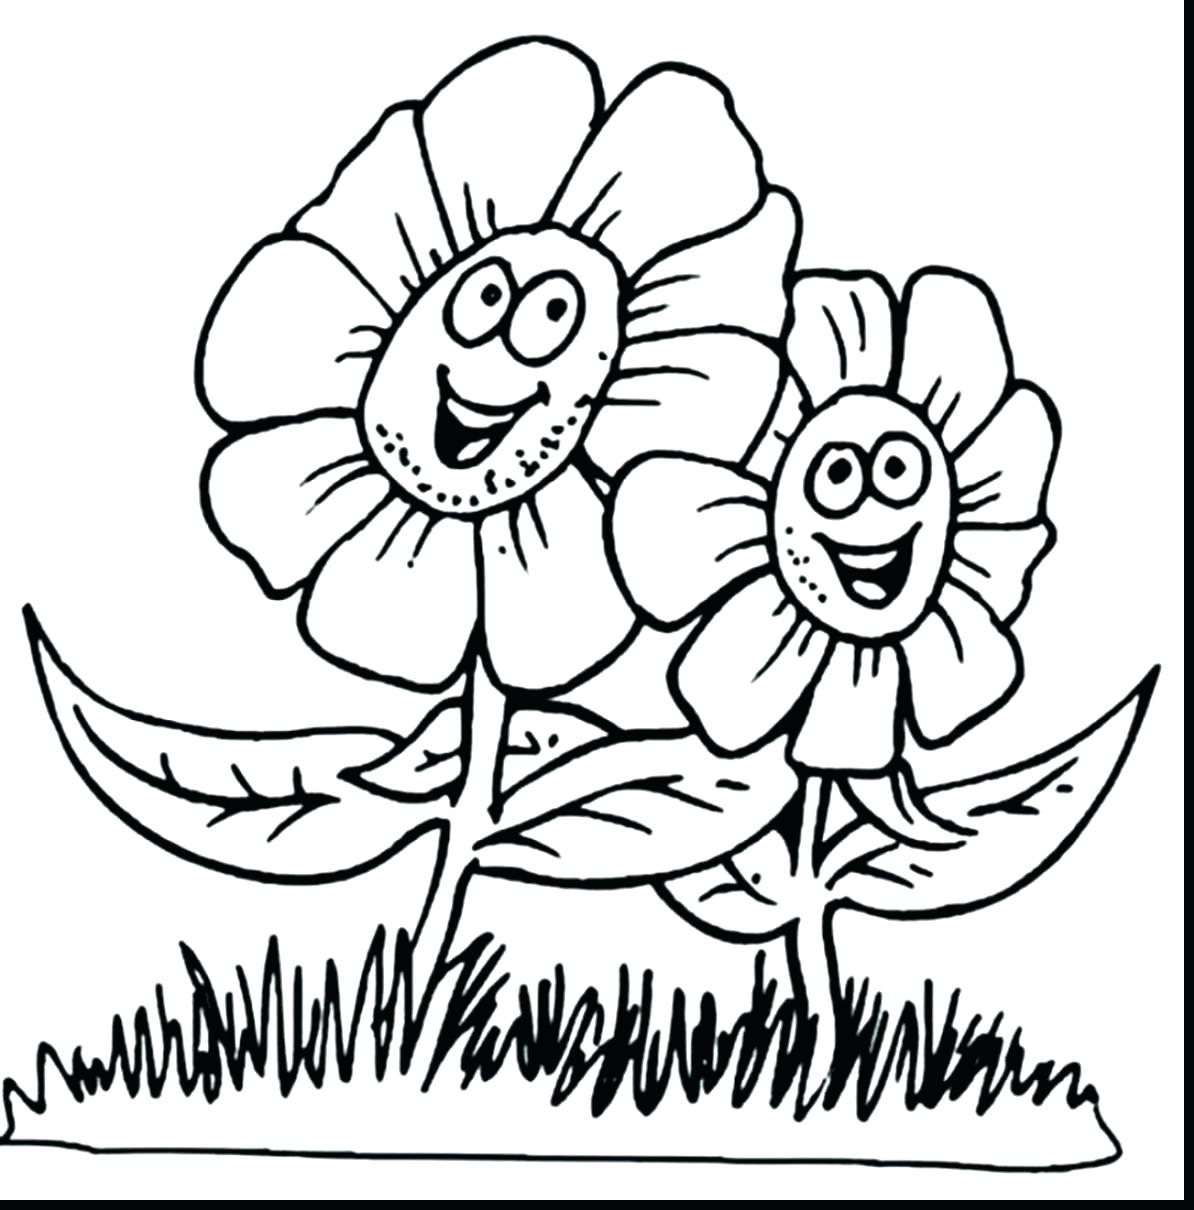 Spring Coloring Pages For Toddlers Spring Coloring Pages For Preschoolers Ednaavenueclub